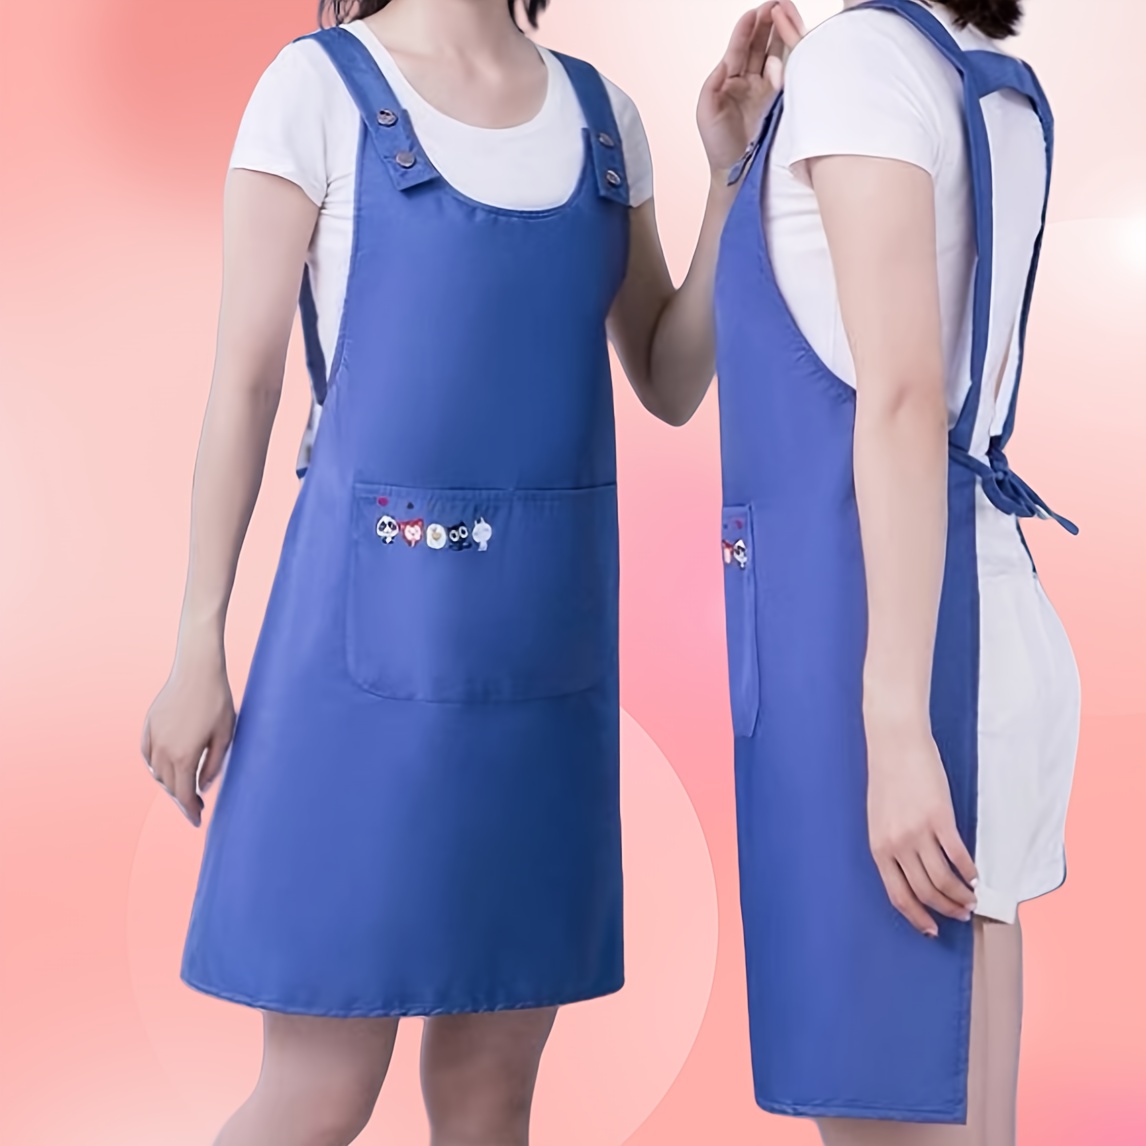 

Versatile Waterproof & Oil-resistant Apron With Adjustable Straps And Pockets - Perfect For Cooking, Bbqs, Gardening, Coffee Shops & More